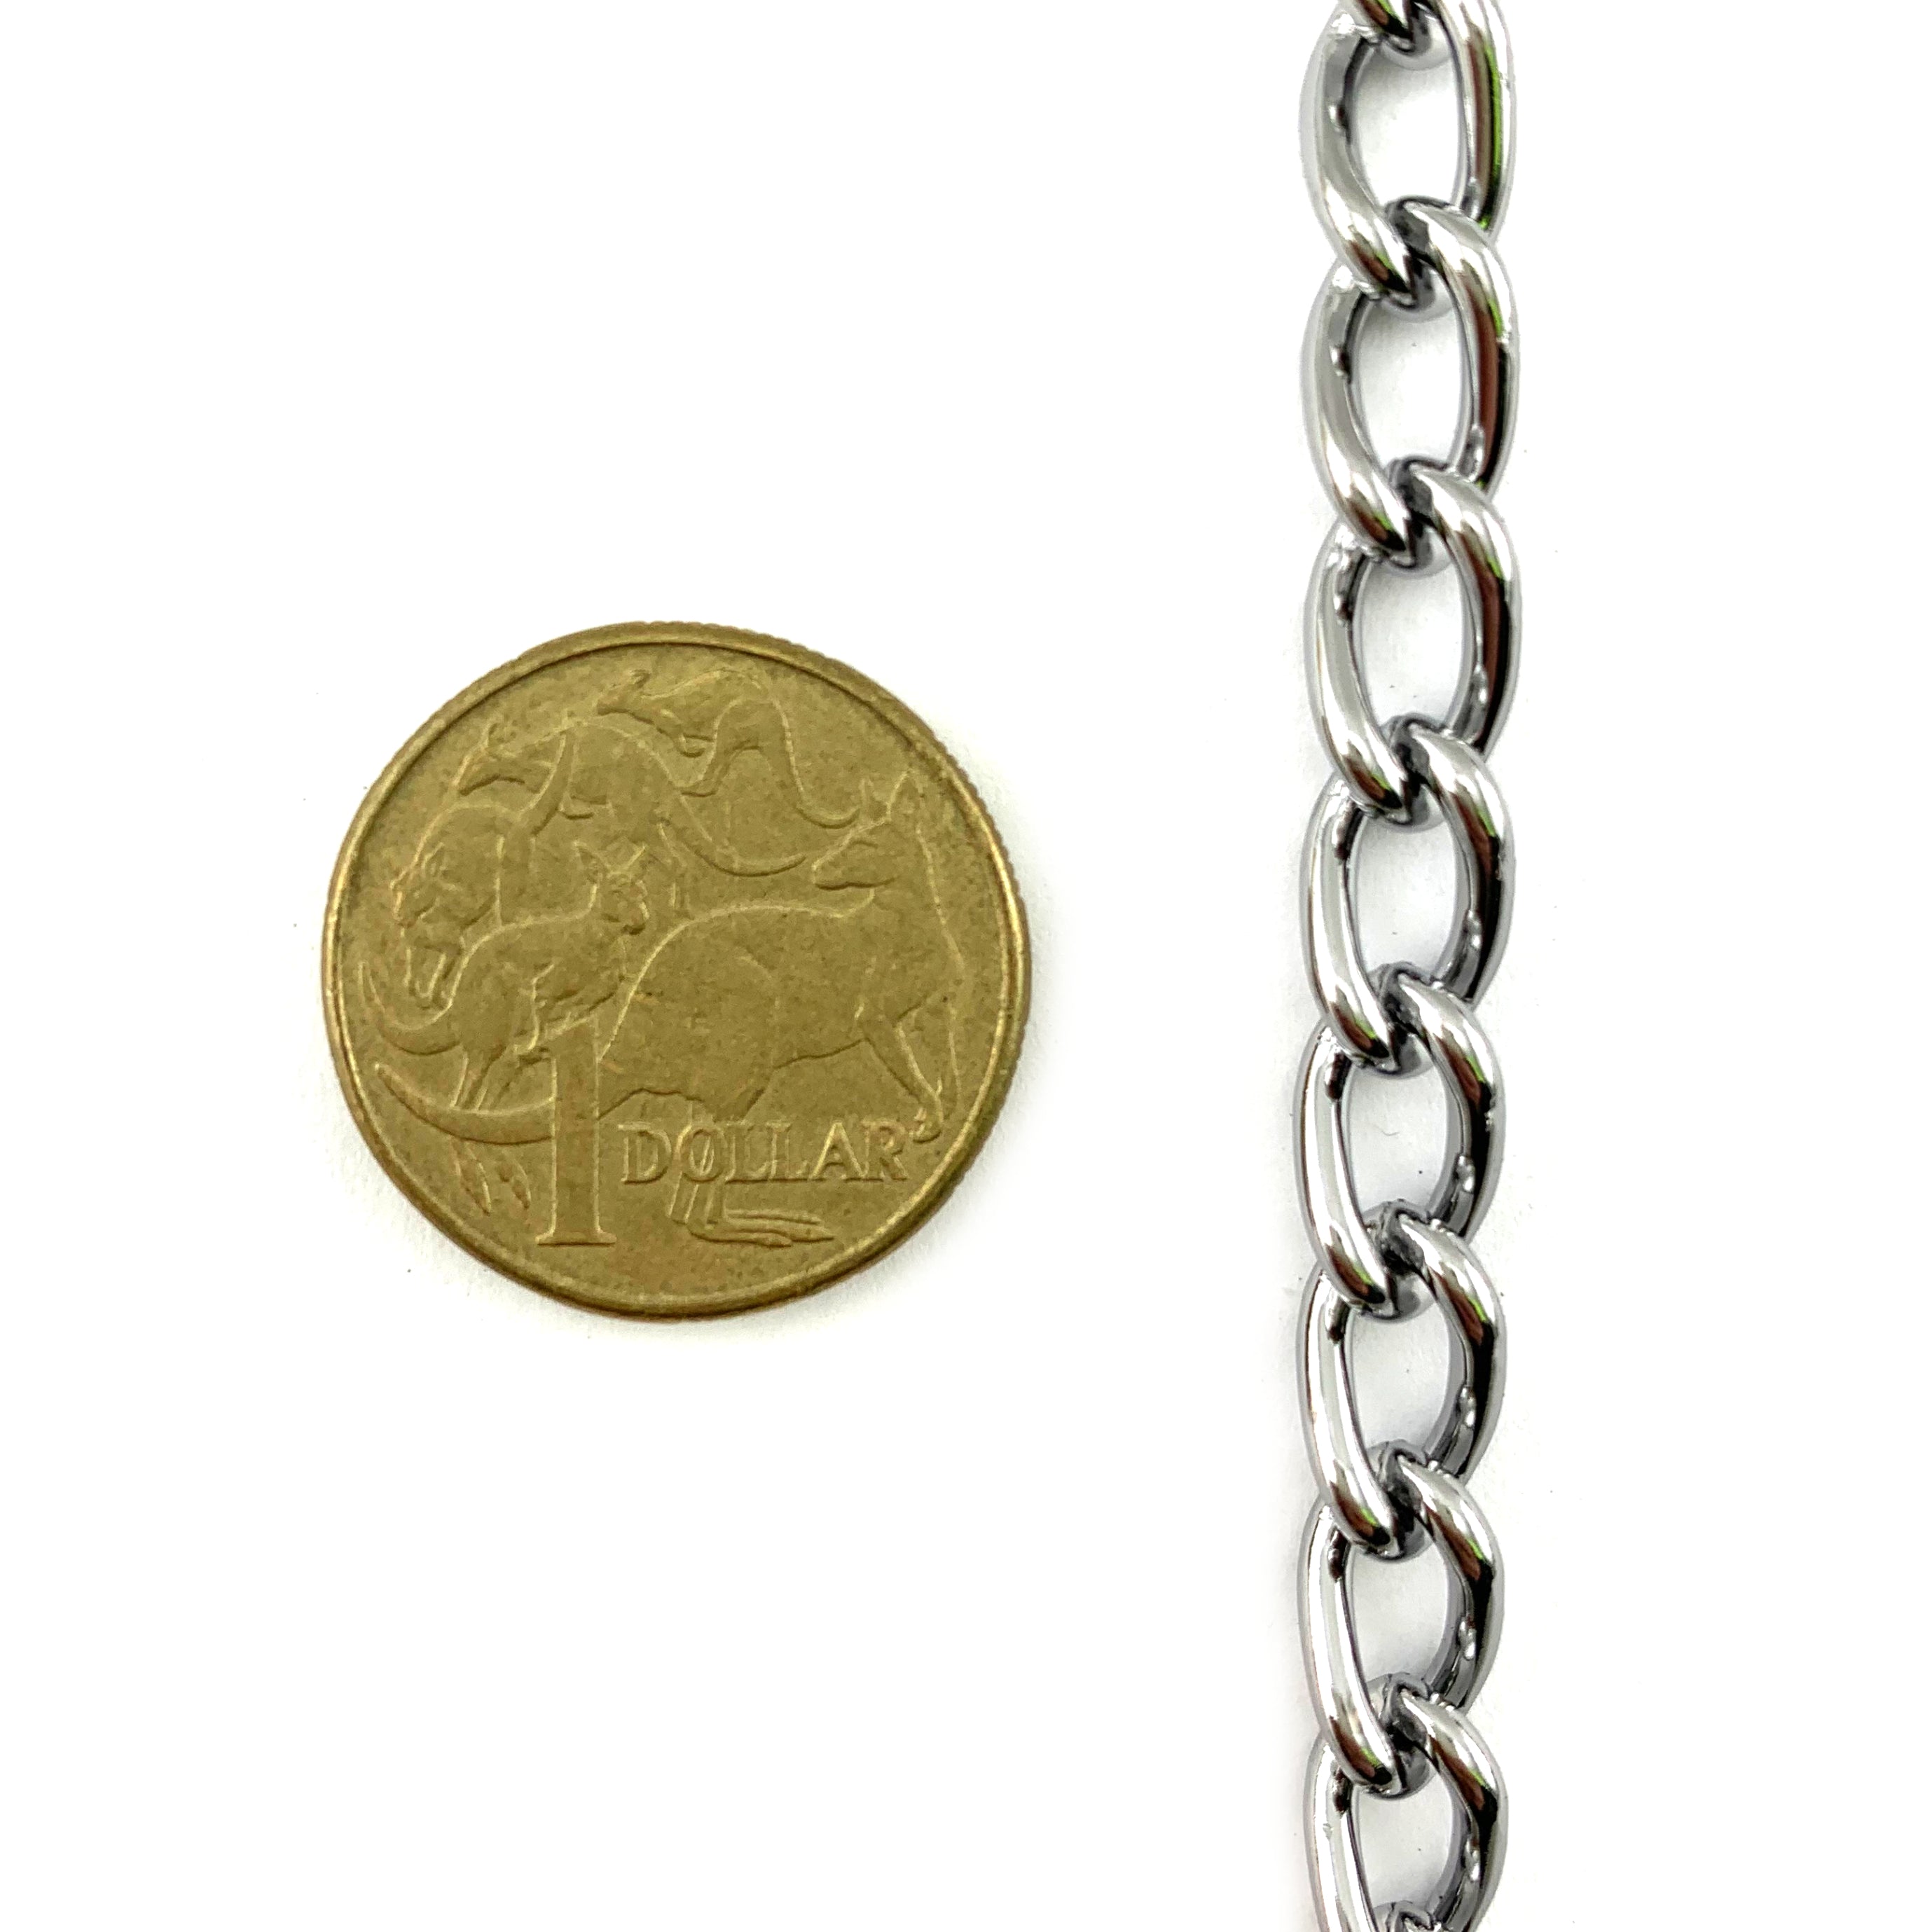 Chrome Curb Chain, 2mm. Chain by the metre. Decorative Chain Australia wide delivery